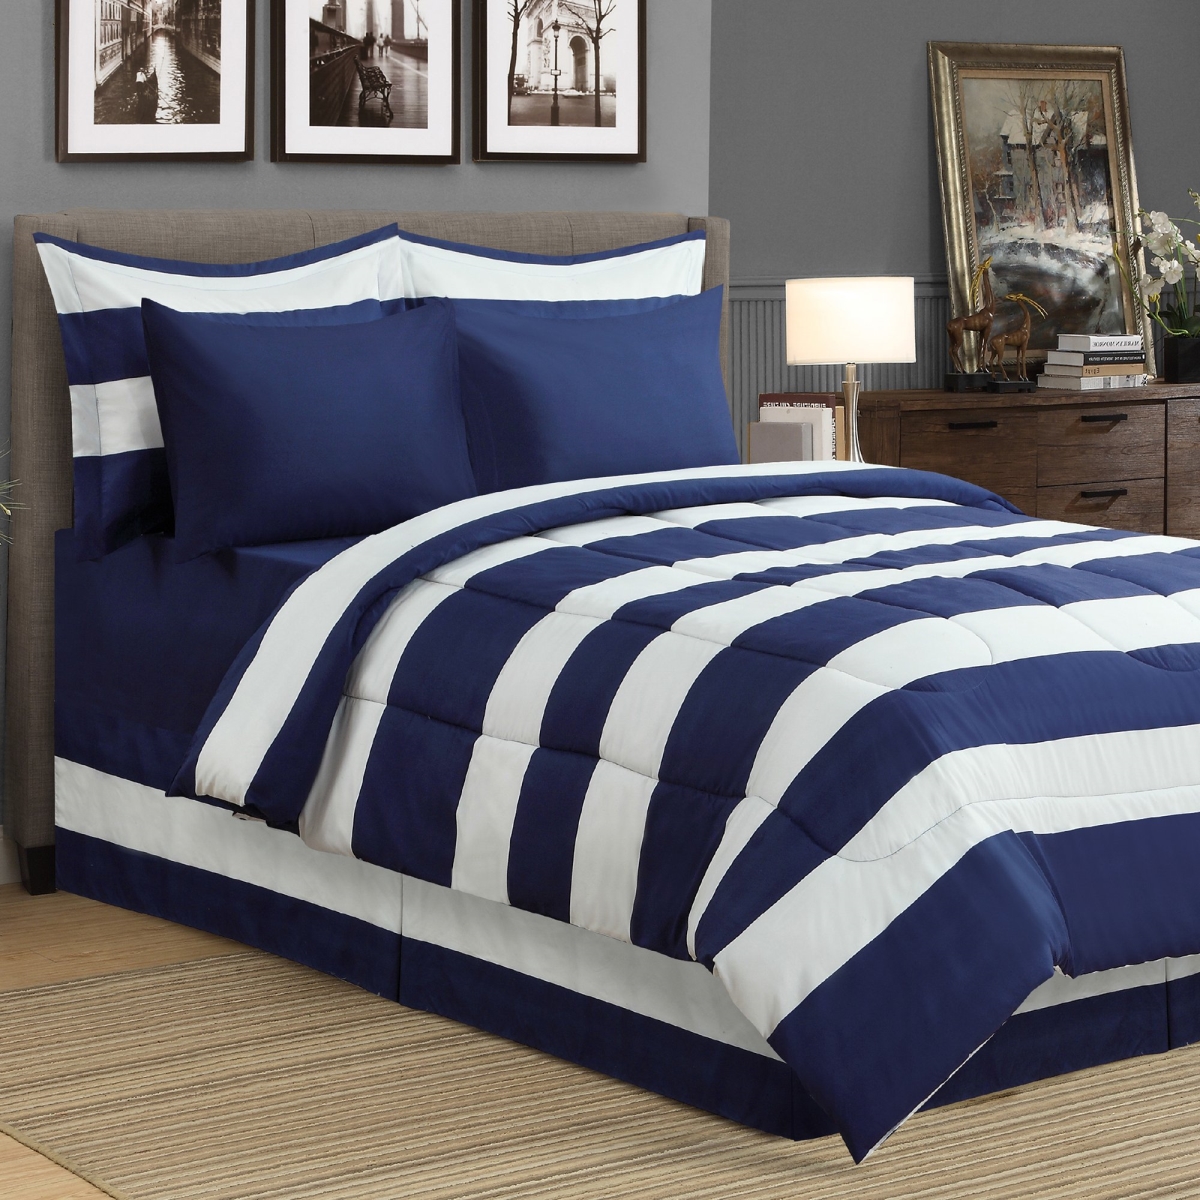 8 Piece Hamshire Bed In A Bag Comforter Set, Navy Blue - King Size